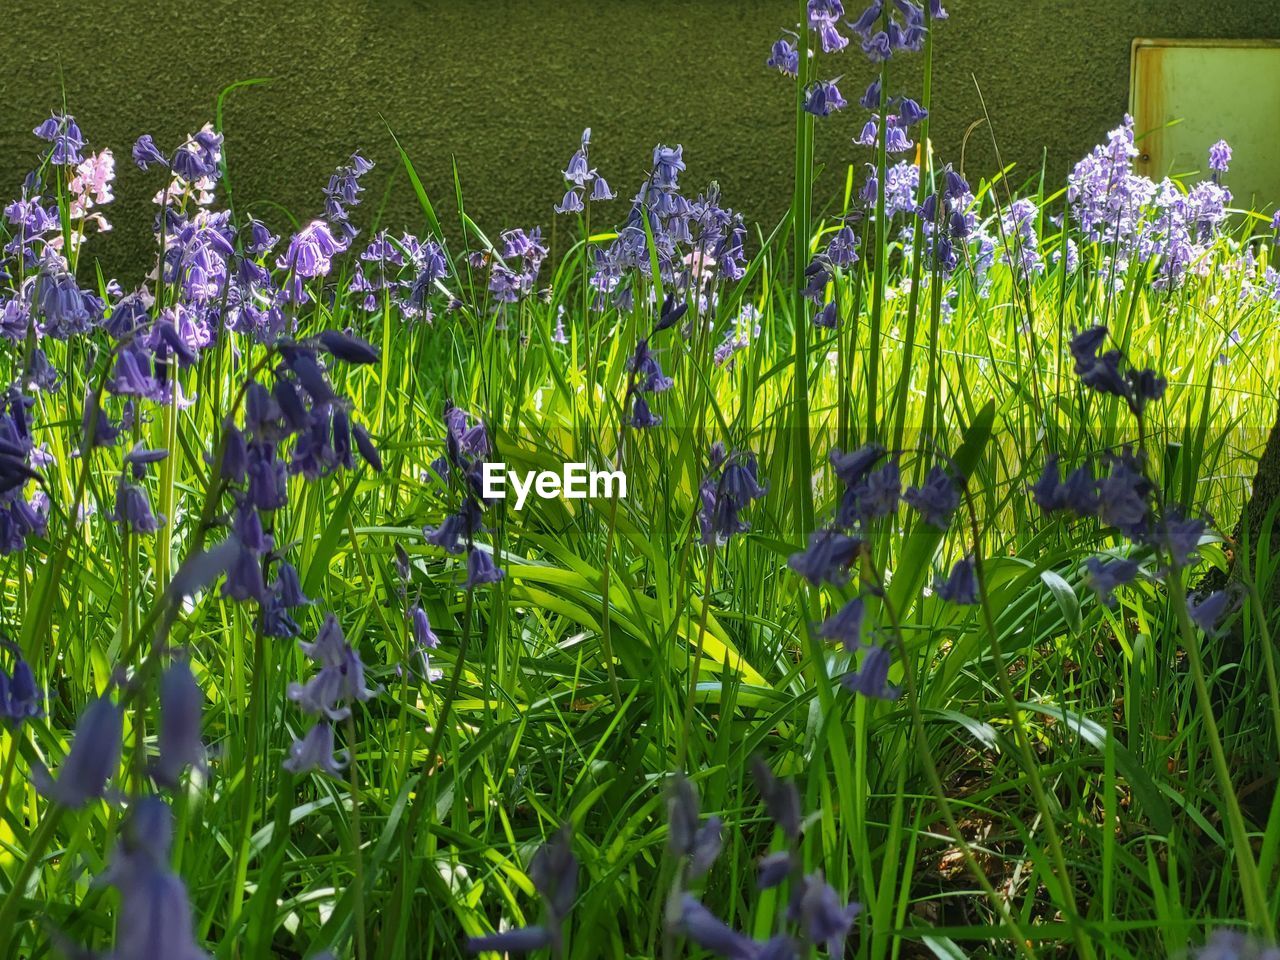 plant, flower, flowering plant, growth, beauty in nature, freshness, nature, green, purple, field, fragility, no people, land, day, meadow, wildflower, outdoors, iris, close-up, grass, lavender, tranquility